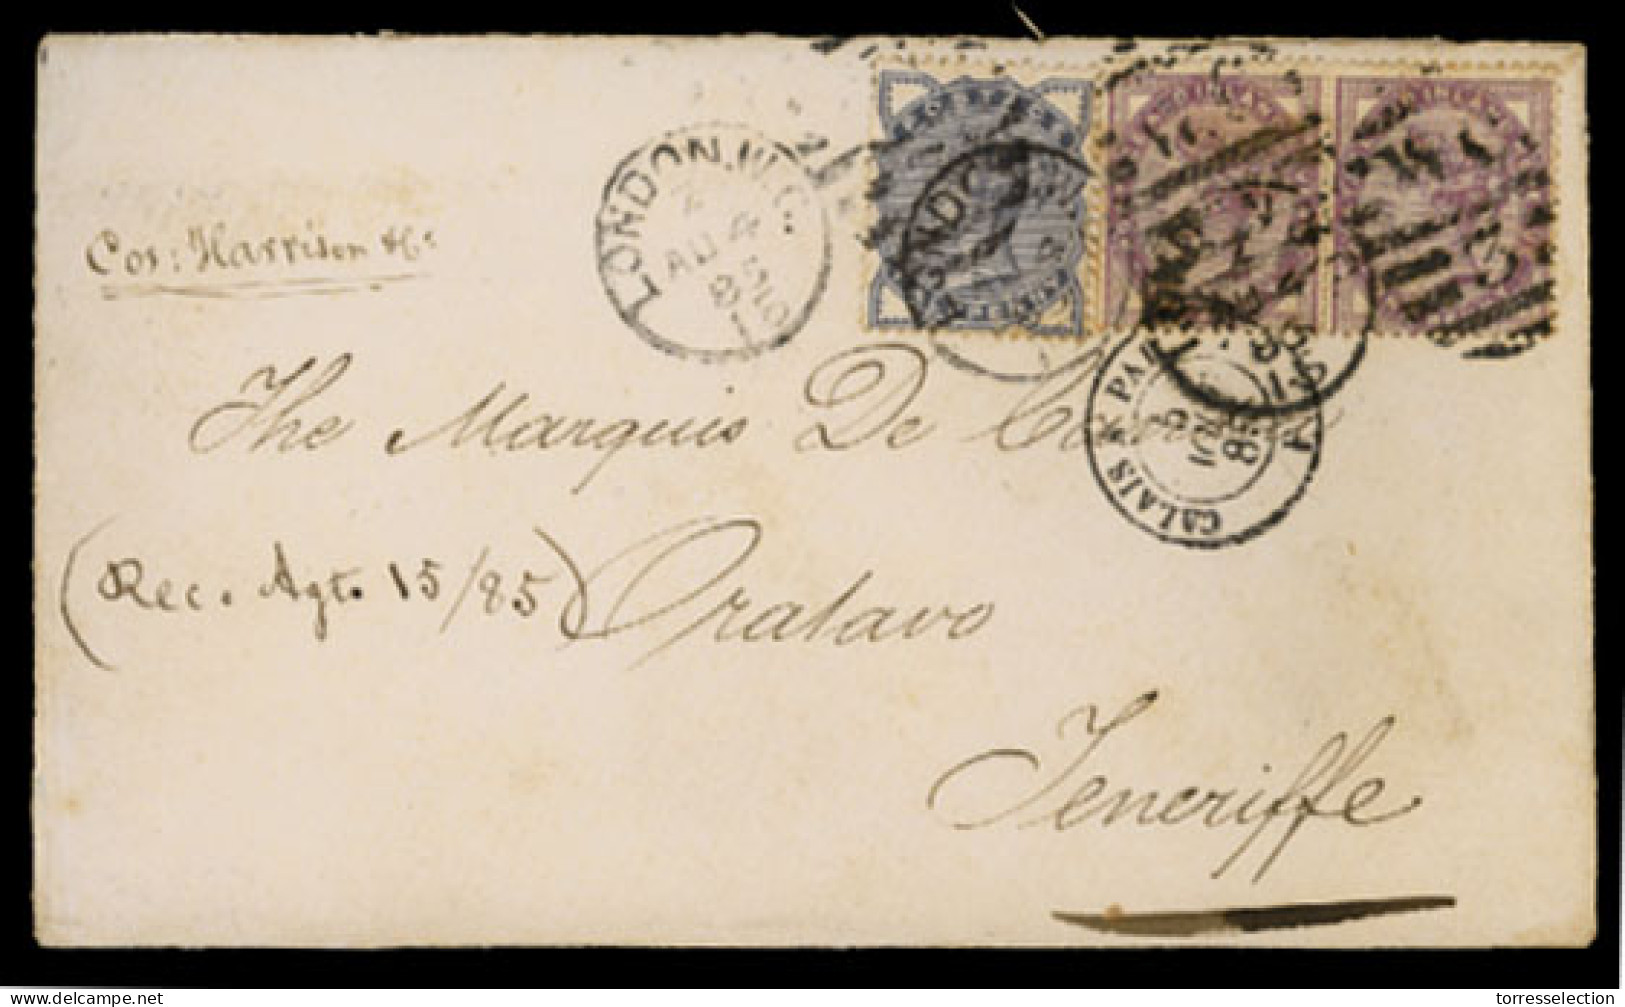 GREAT BRITAIN. 1885. London To Tenerife, Canary Islands. Franked Envelope (3 Stamps). VF. - ...-1840 Voorlopers